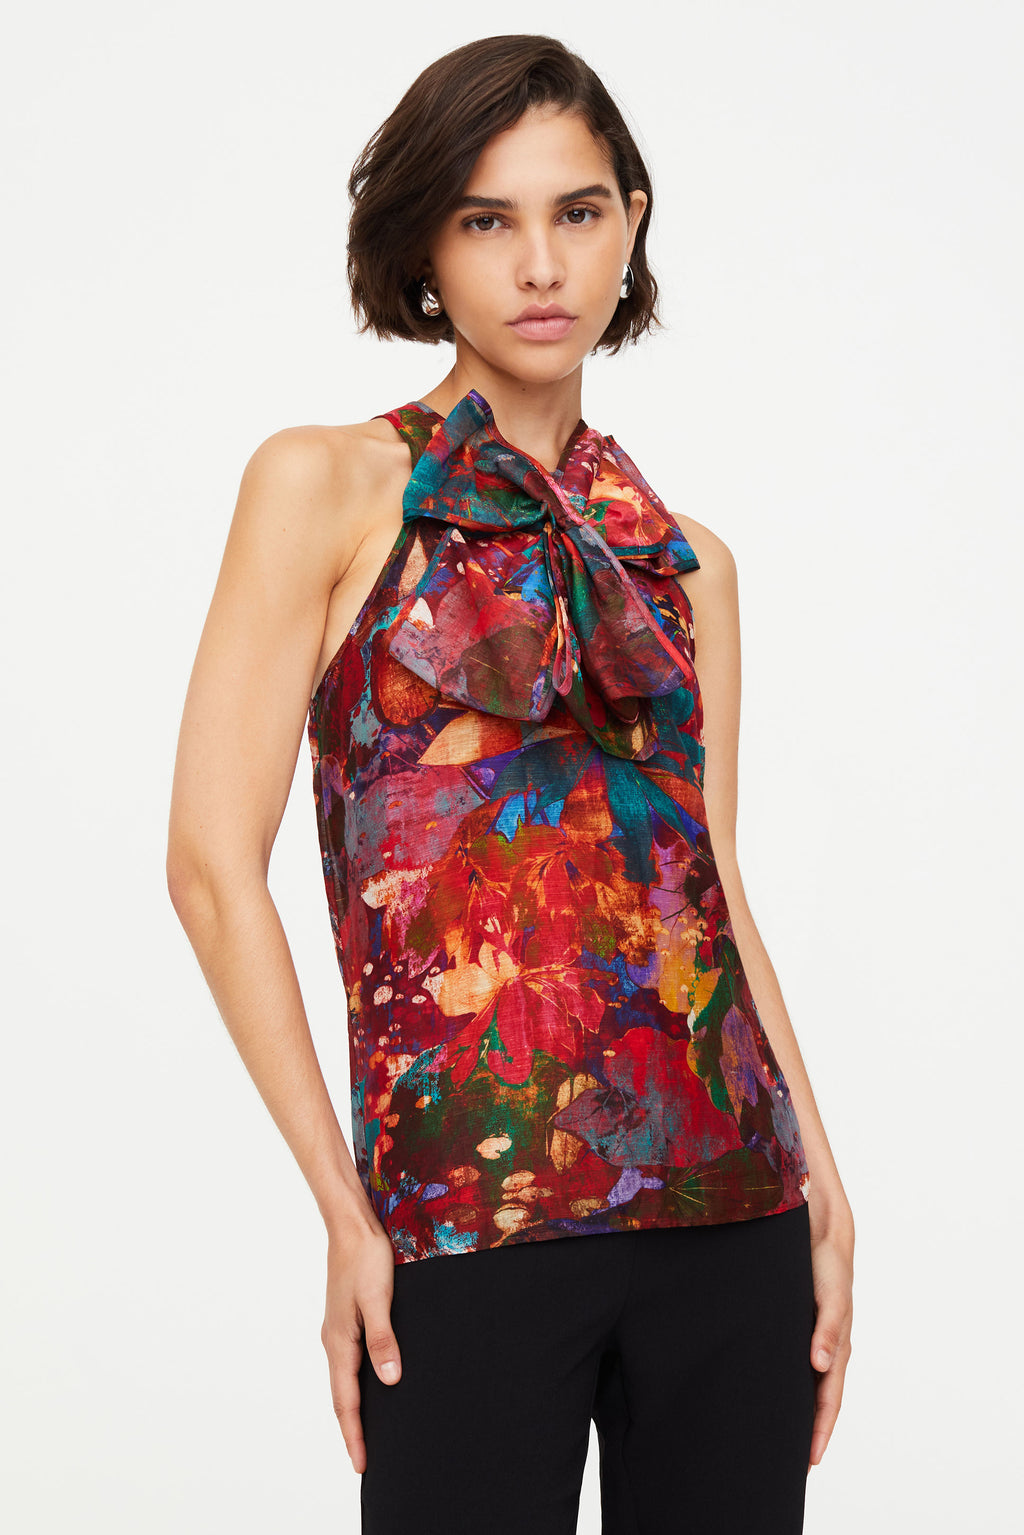 Sleeveless patterned top with bow in center 